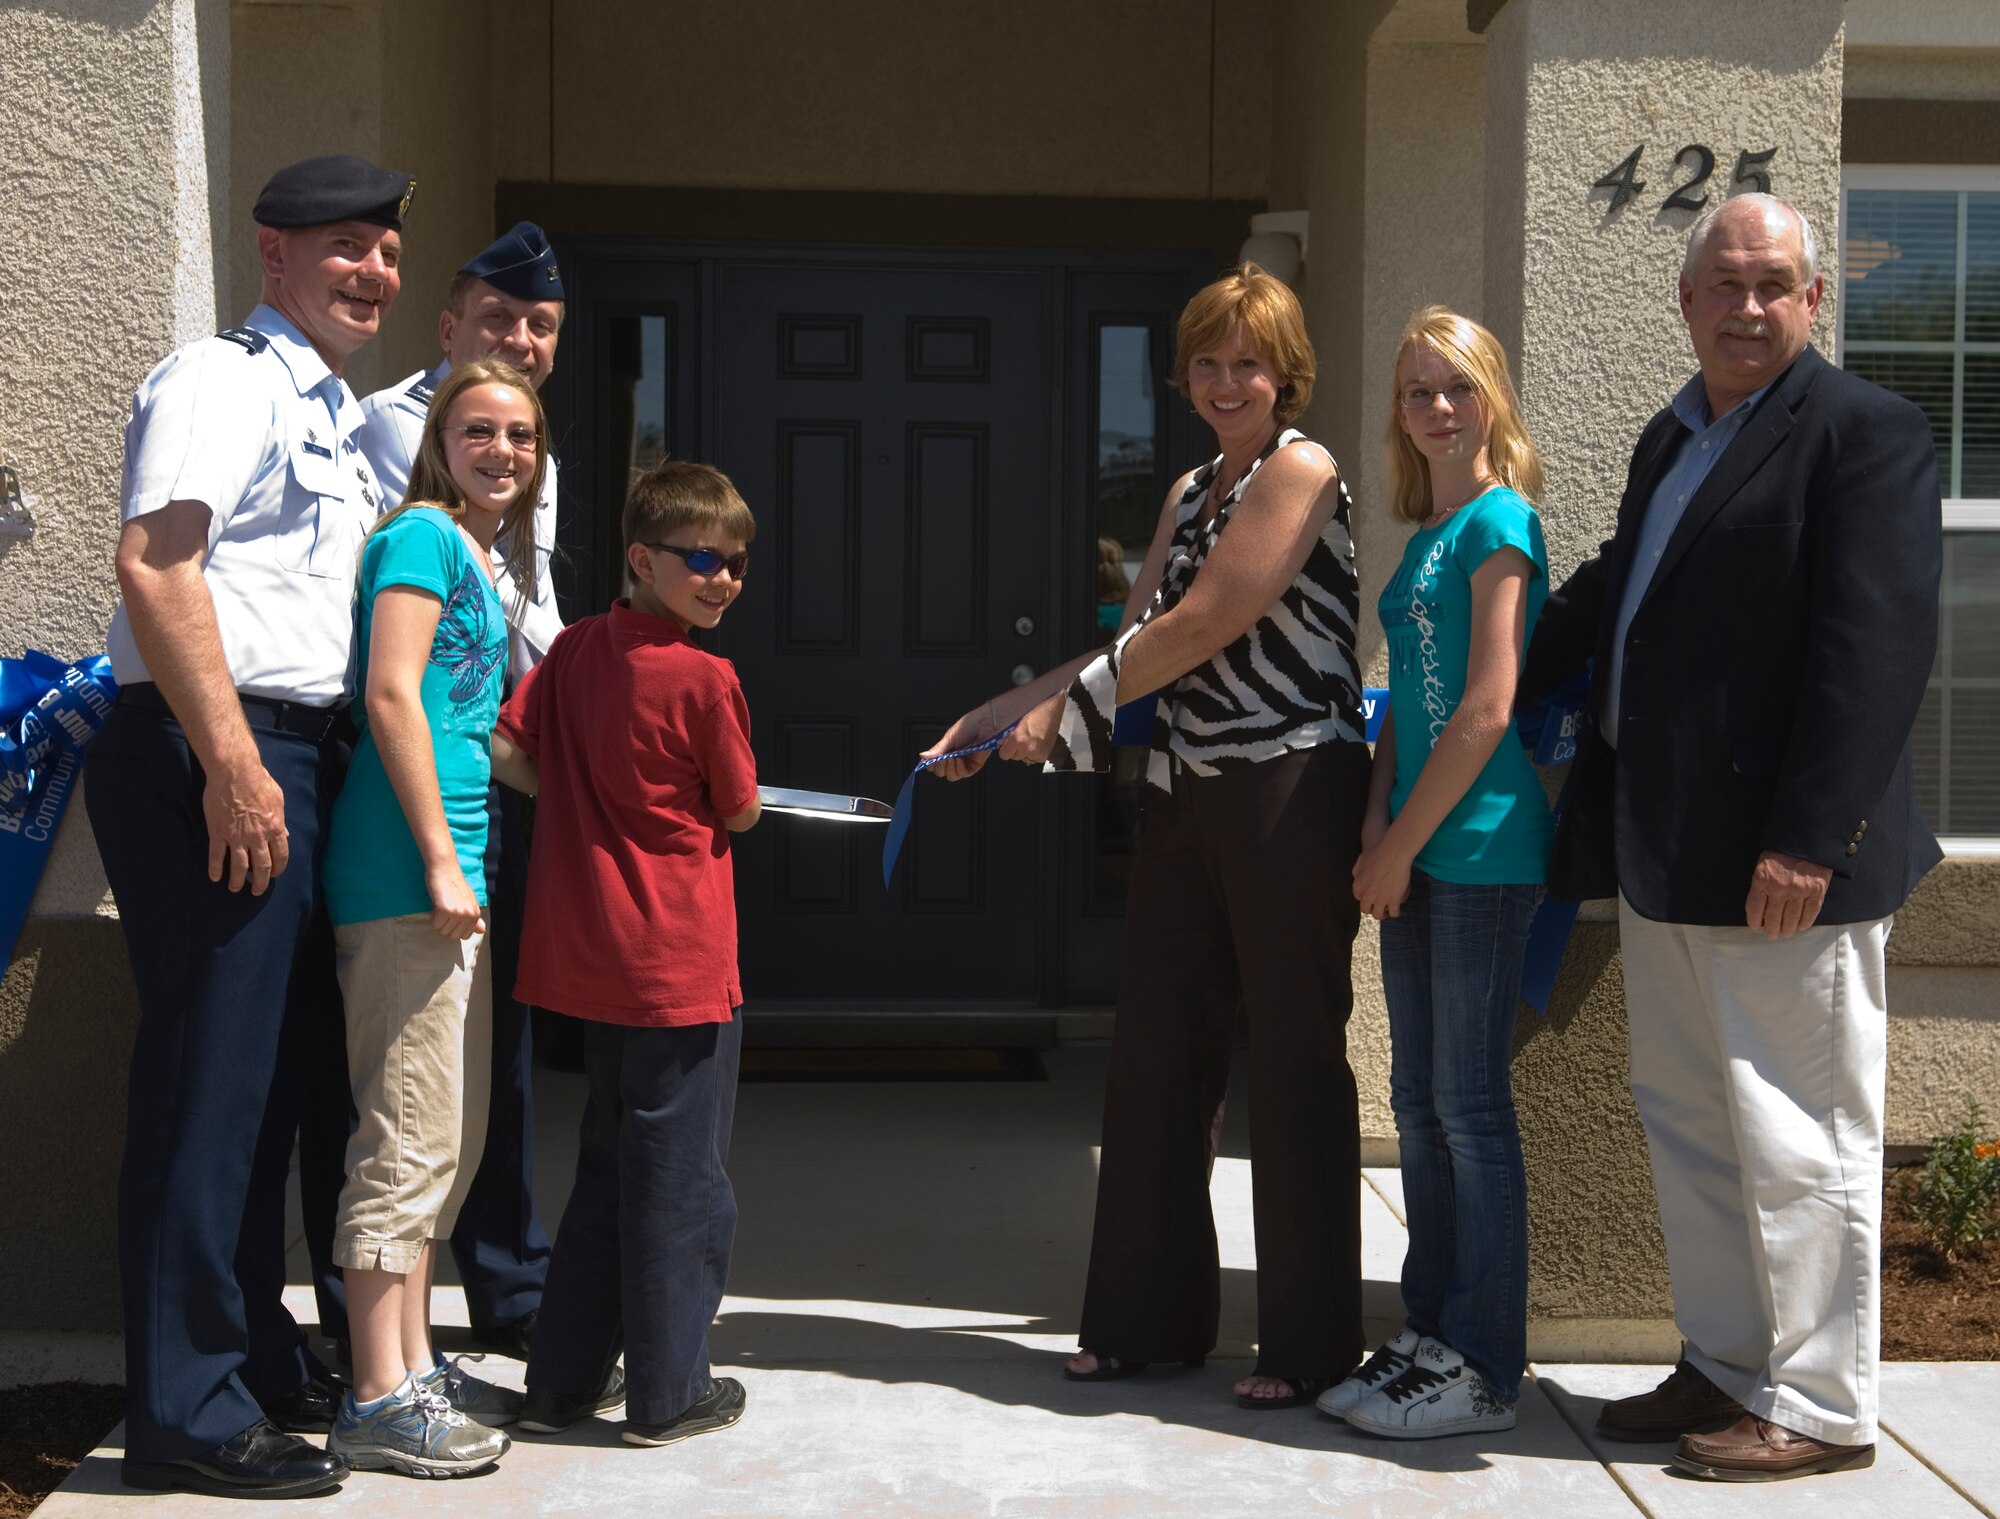 VANDENBERG AIR FORCE BASE, Calif. --   Lt. Col. Joseph Milner, 30th Security Forces commander, alongside his family and 30th Space Wing Commander Col. David Buck, cuts the ribbon symbolizing the opening of the Milner's new home and the first home to be opened in the new company and field grade housing complex here. The Milner's home is part of a project that encompasses 458 acres with plans to build 164 new homes and renovate 703 of the existing homes.  (U.S. Air Force photo/Airman 1st Class Andrew Lee)